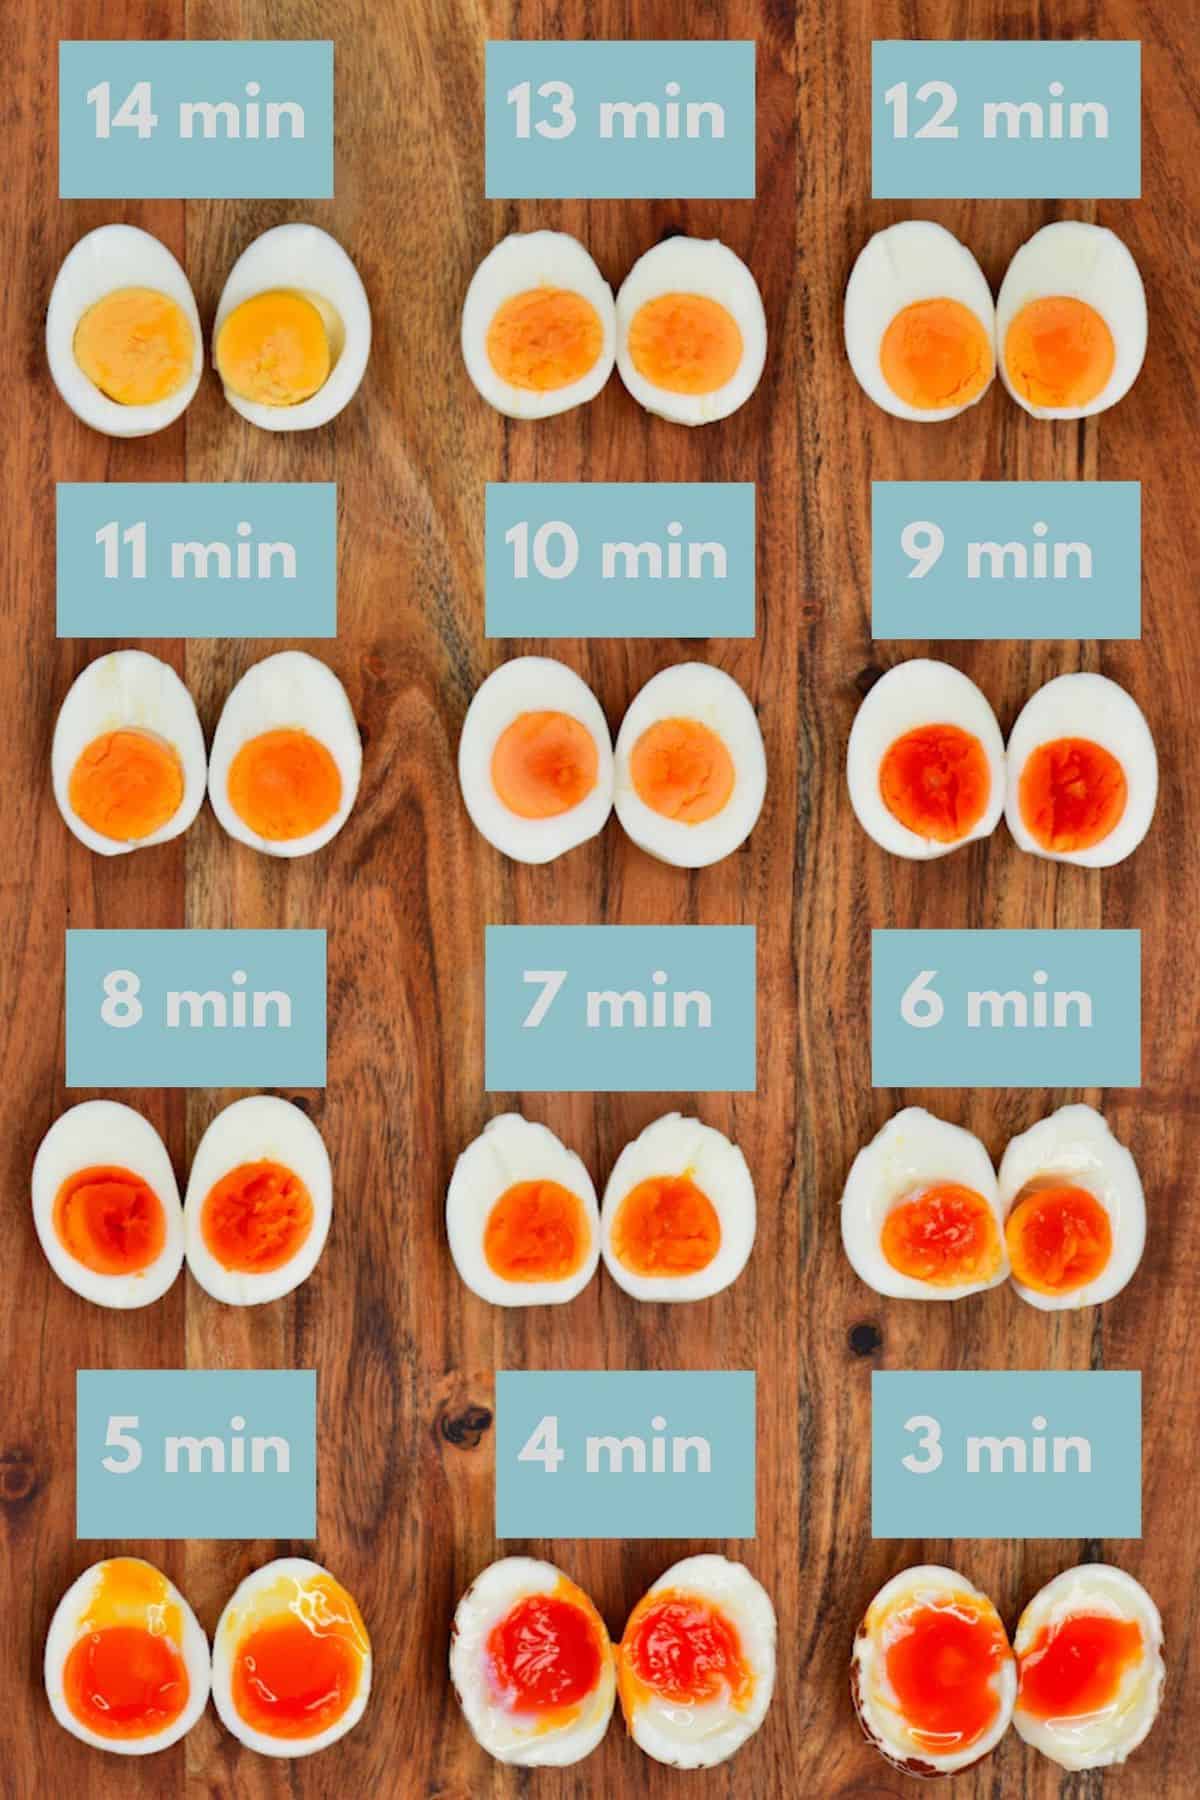 https://www.alphafoodie.com/wp-content/uploads/2020/12/how-to-boil-eggs-perfectly.jpg